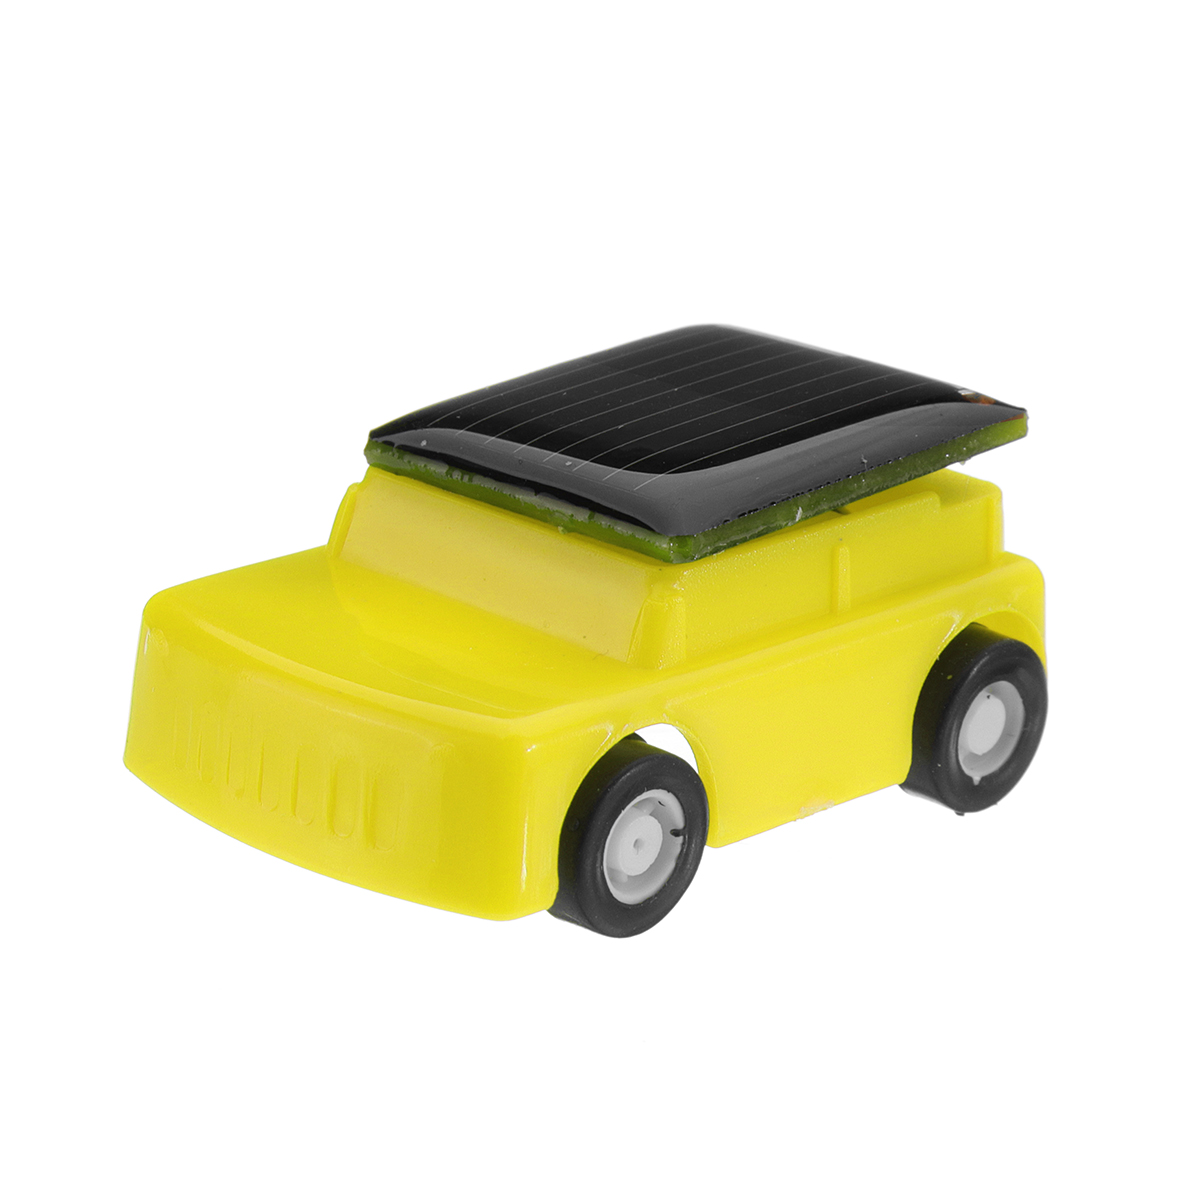 Solar-Powered-Toy-Mini-Car-Kids-Gift-Super-Cute-Creative-ABS-No-toxic-Material-Children-Favorate-1315990-4